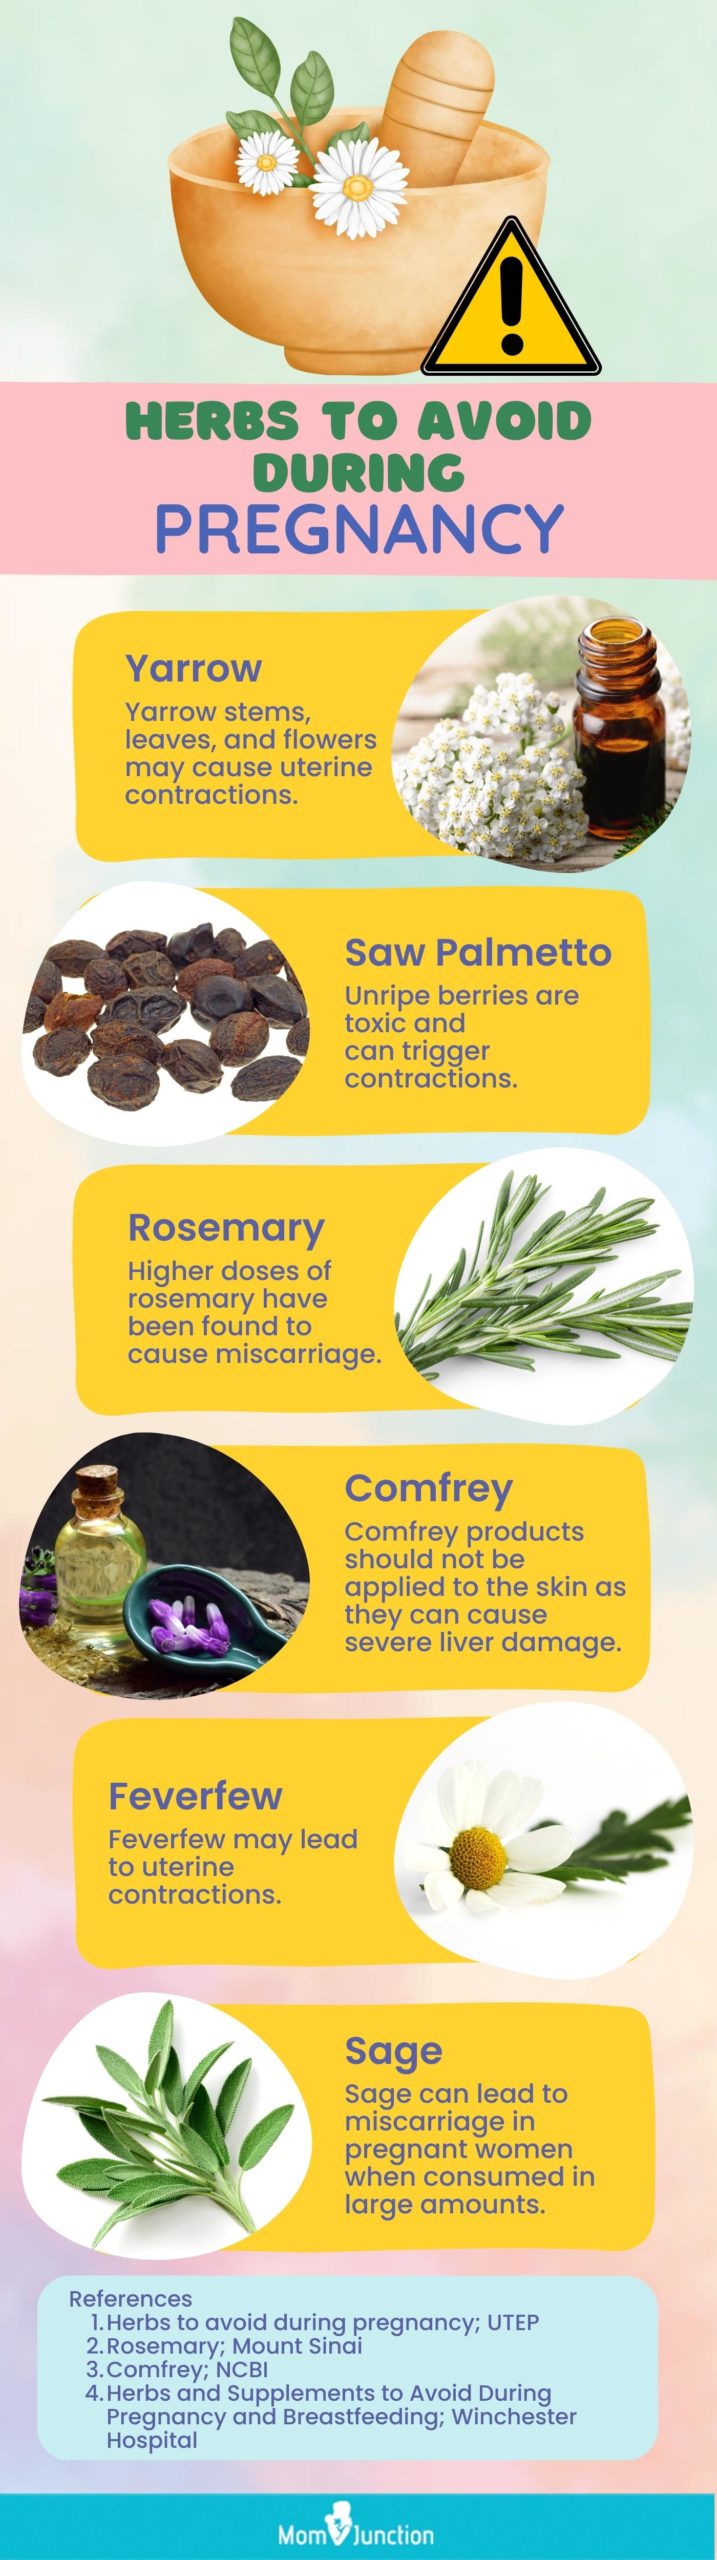 herbs to avoid during pregnancy (infographic)